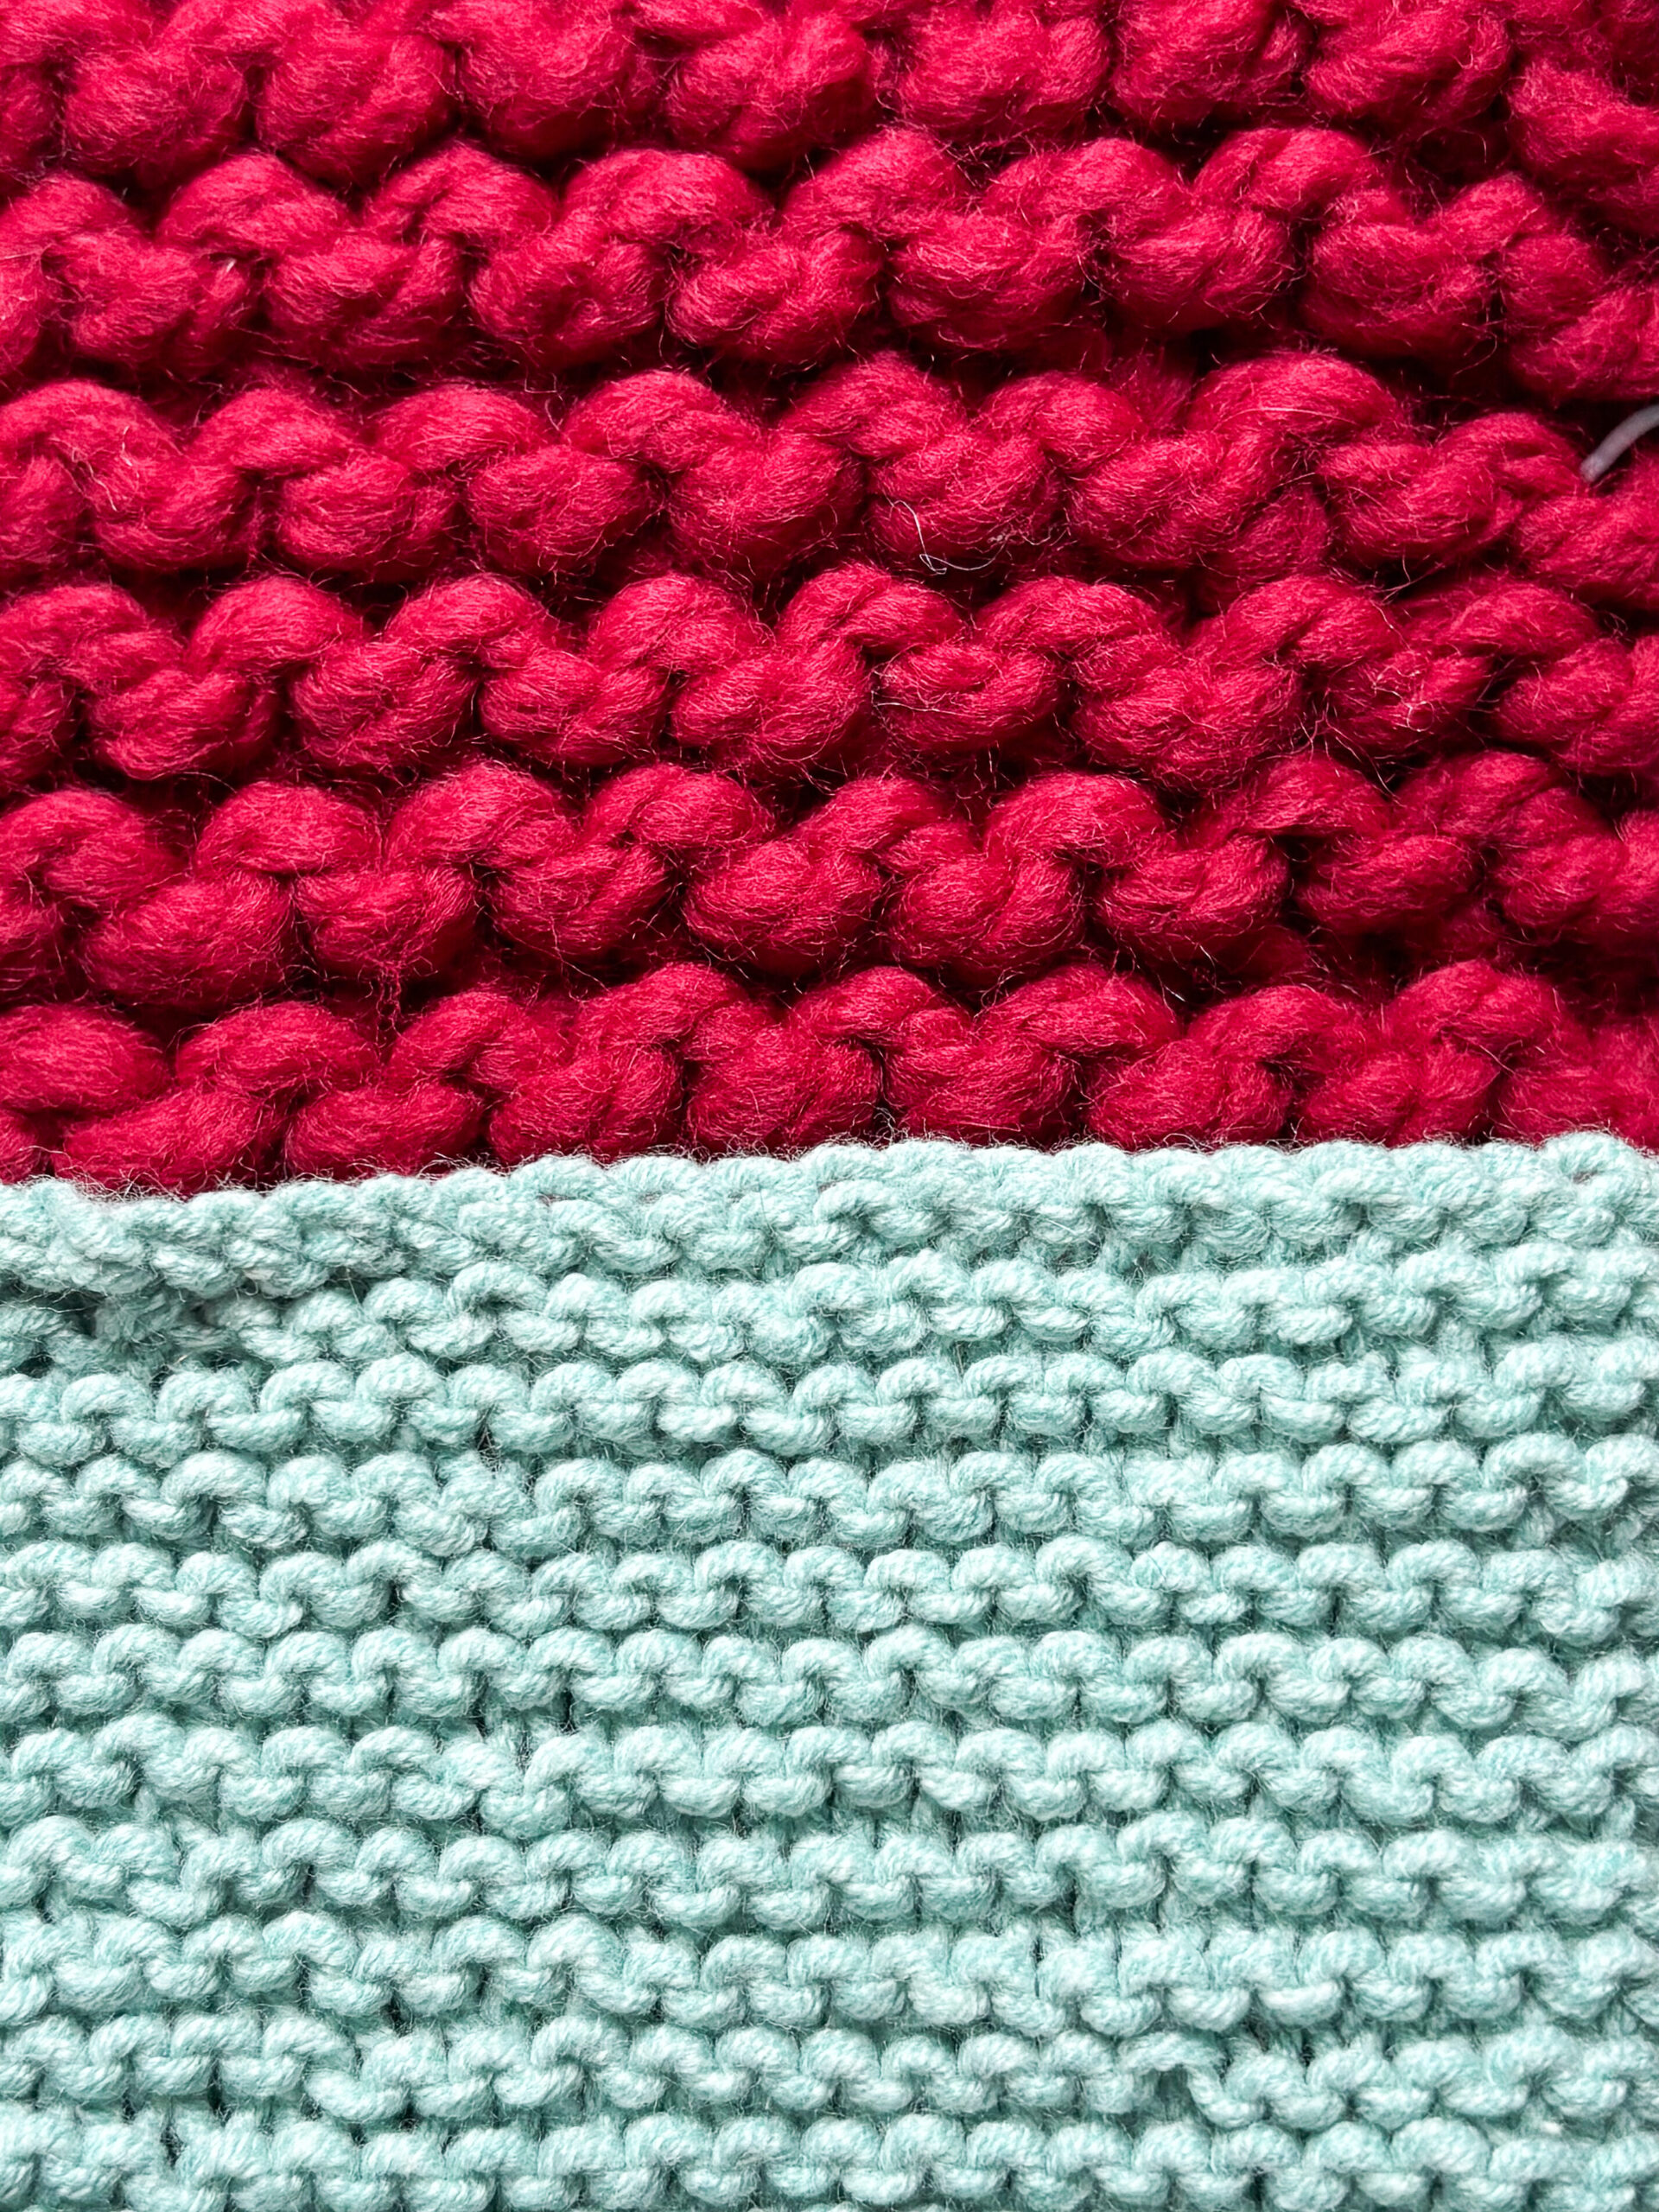 Knitting Basics Understanding Gauge. two knit pieces in garter stitch one using small yarn and needles, the other using thick yarn and large needles